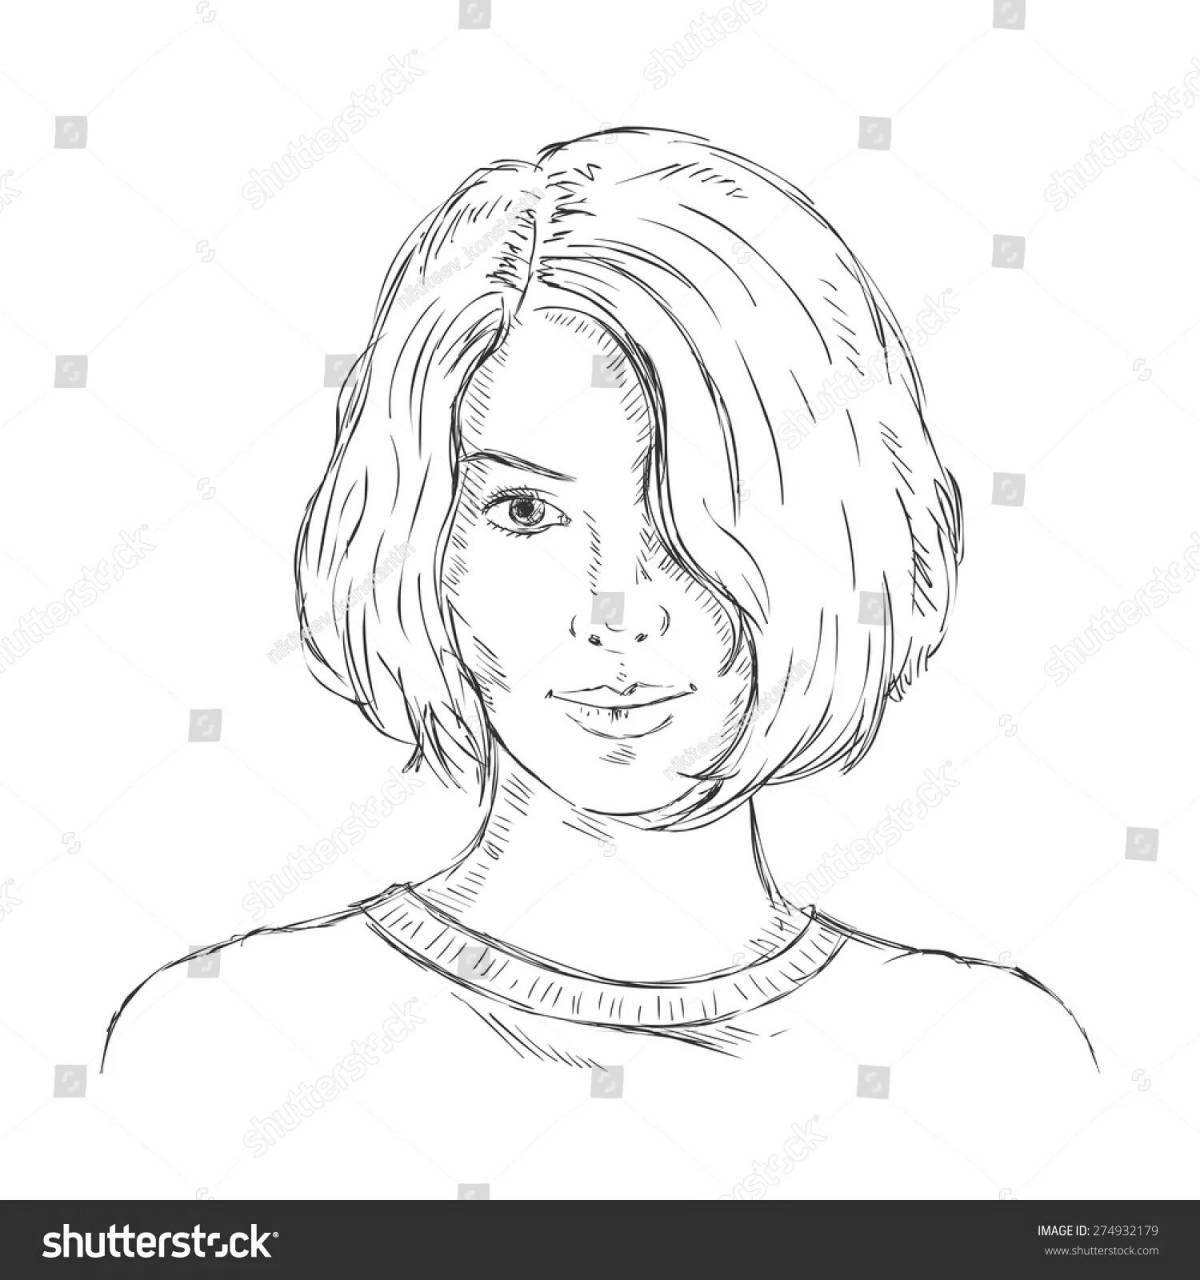 Serendipitous coloring page portrait of a girl with a face